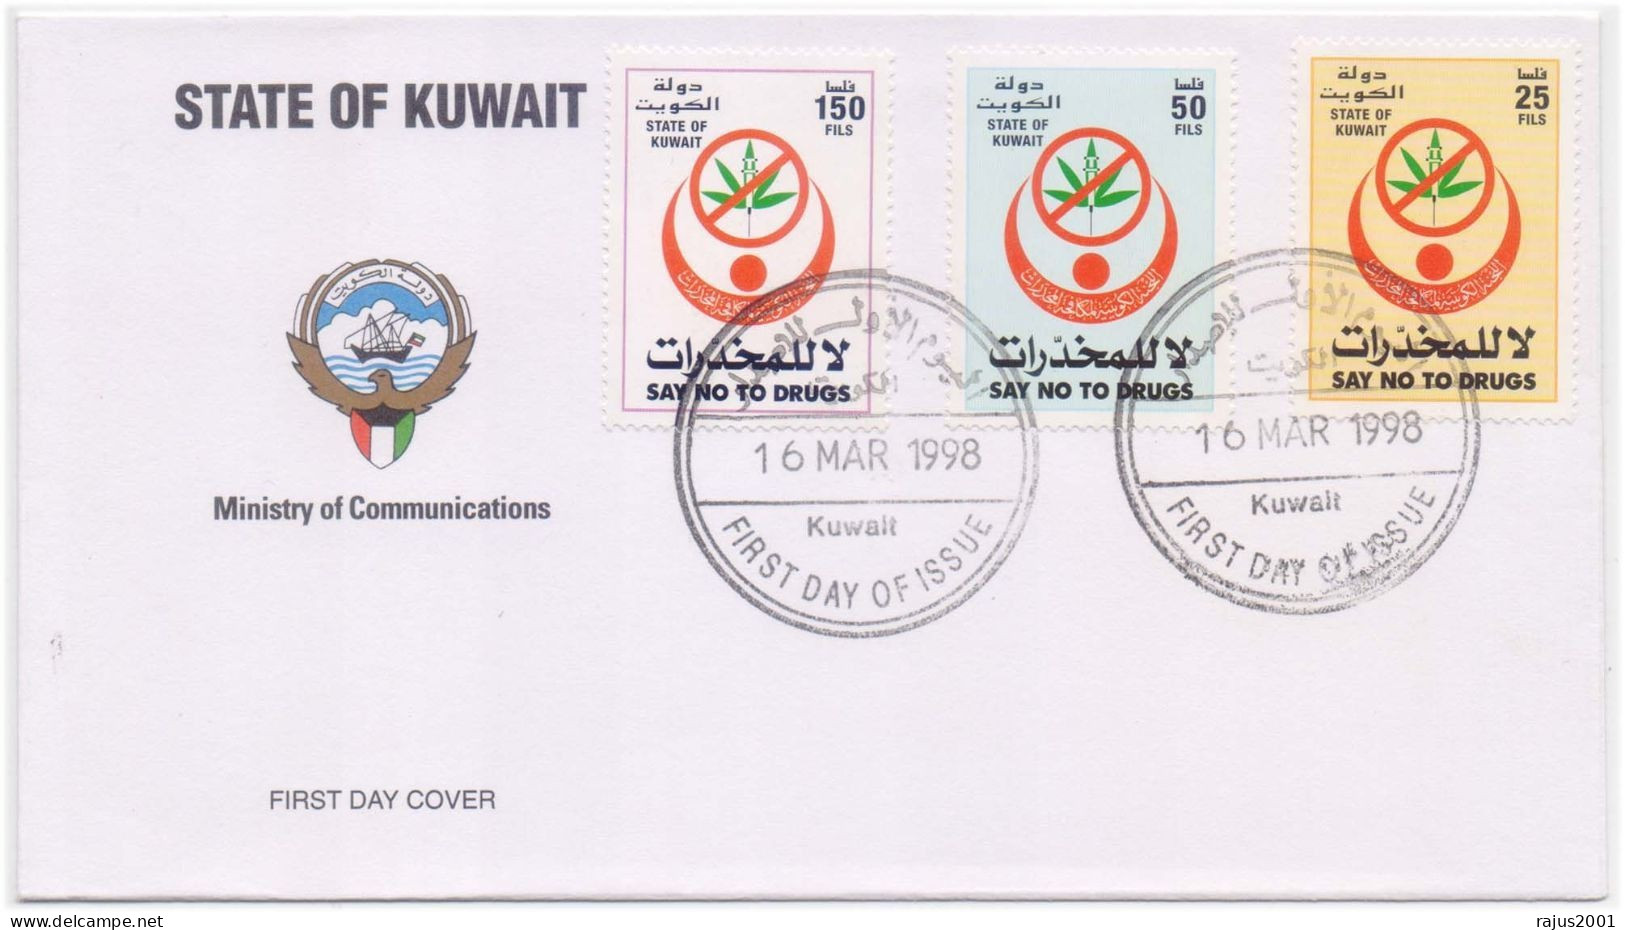 Say No To Drugs, Fight Against Drugs Abuse, Syringe, Disease, Red Crescent, Health, Medical, Kuwait 1998 FDC - Drugs